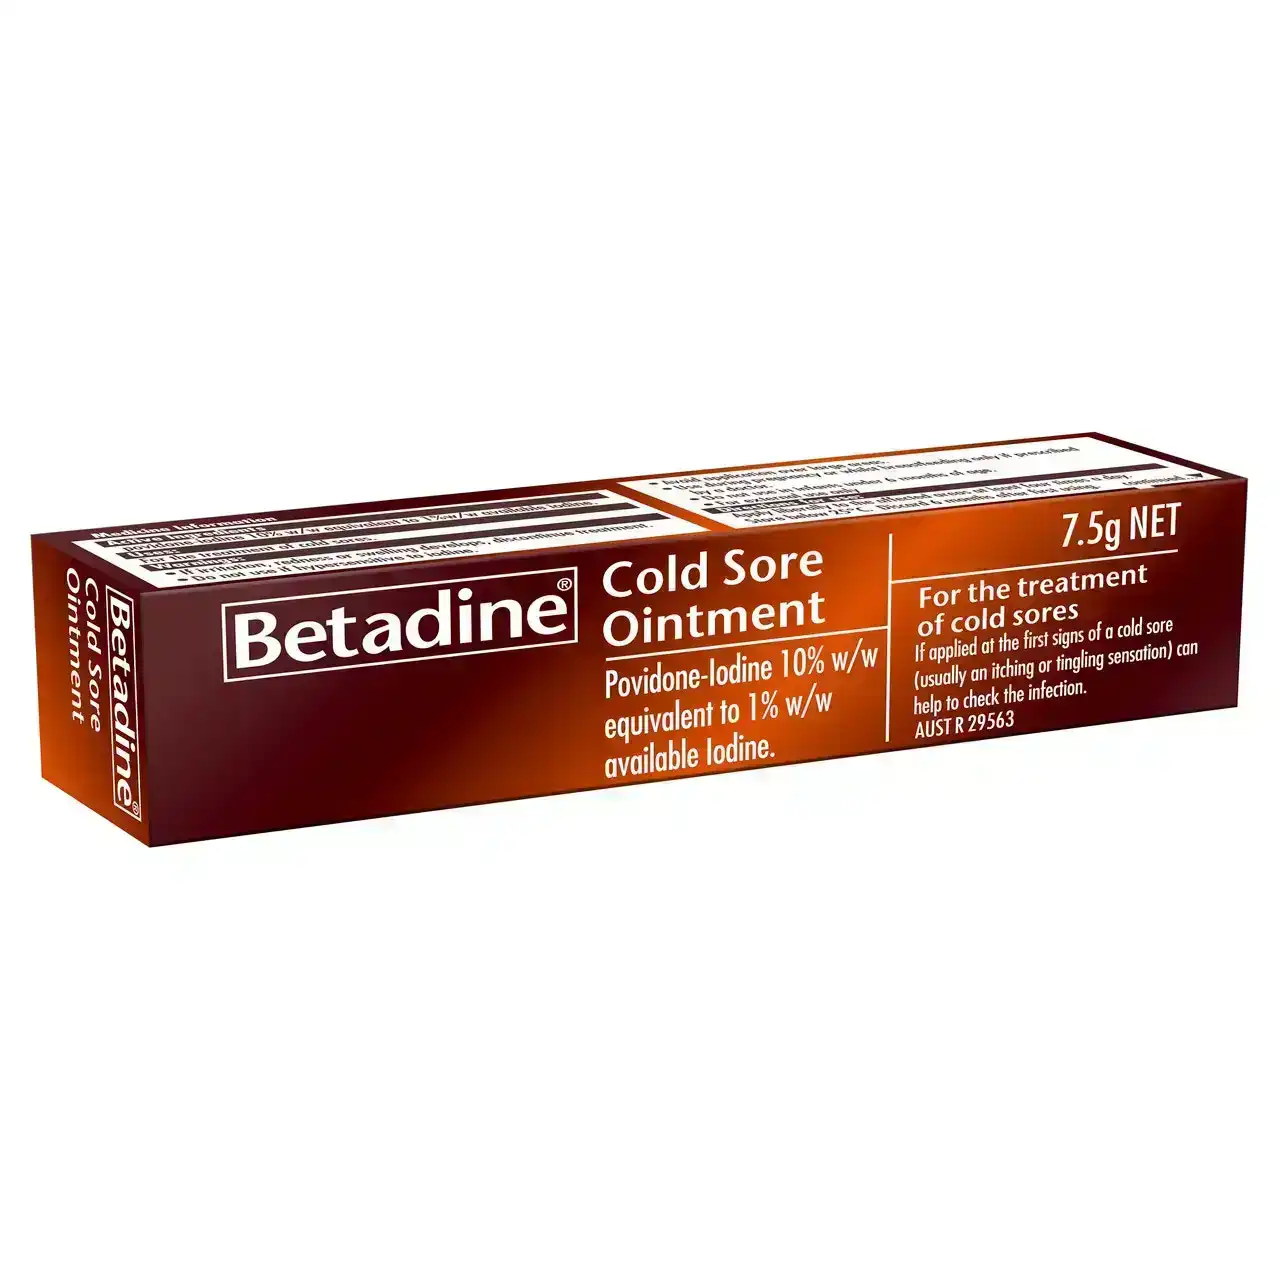 Betadine Cold Sore Ointment 7.5g